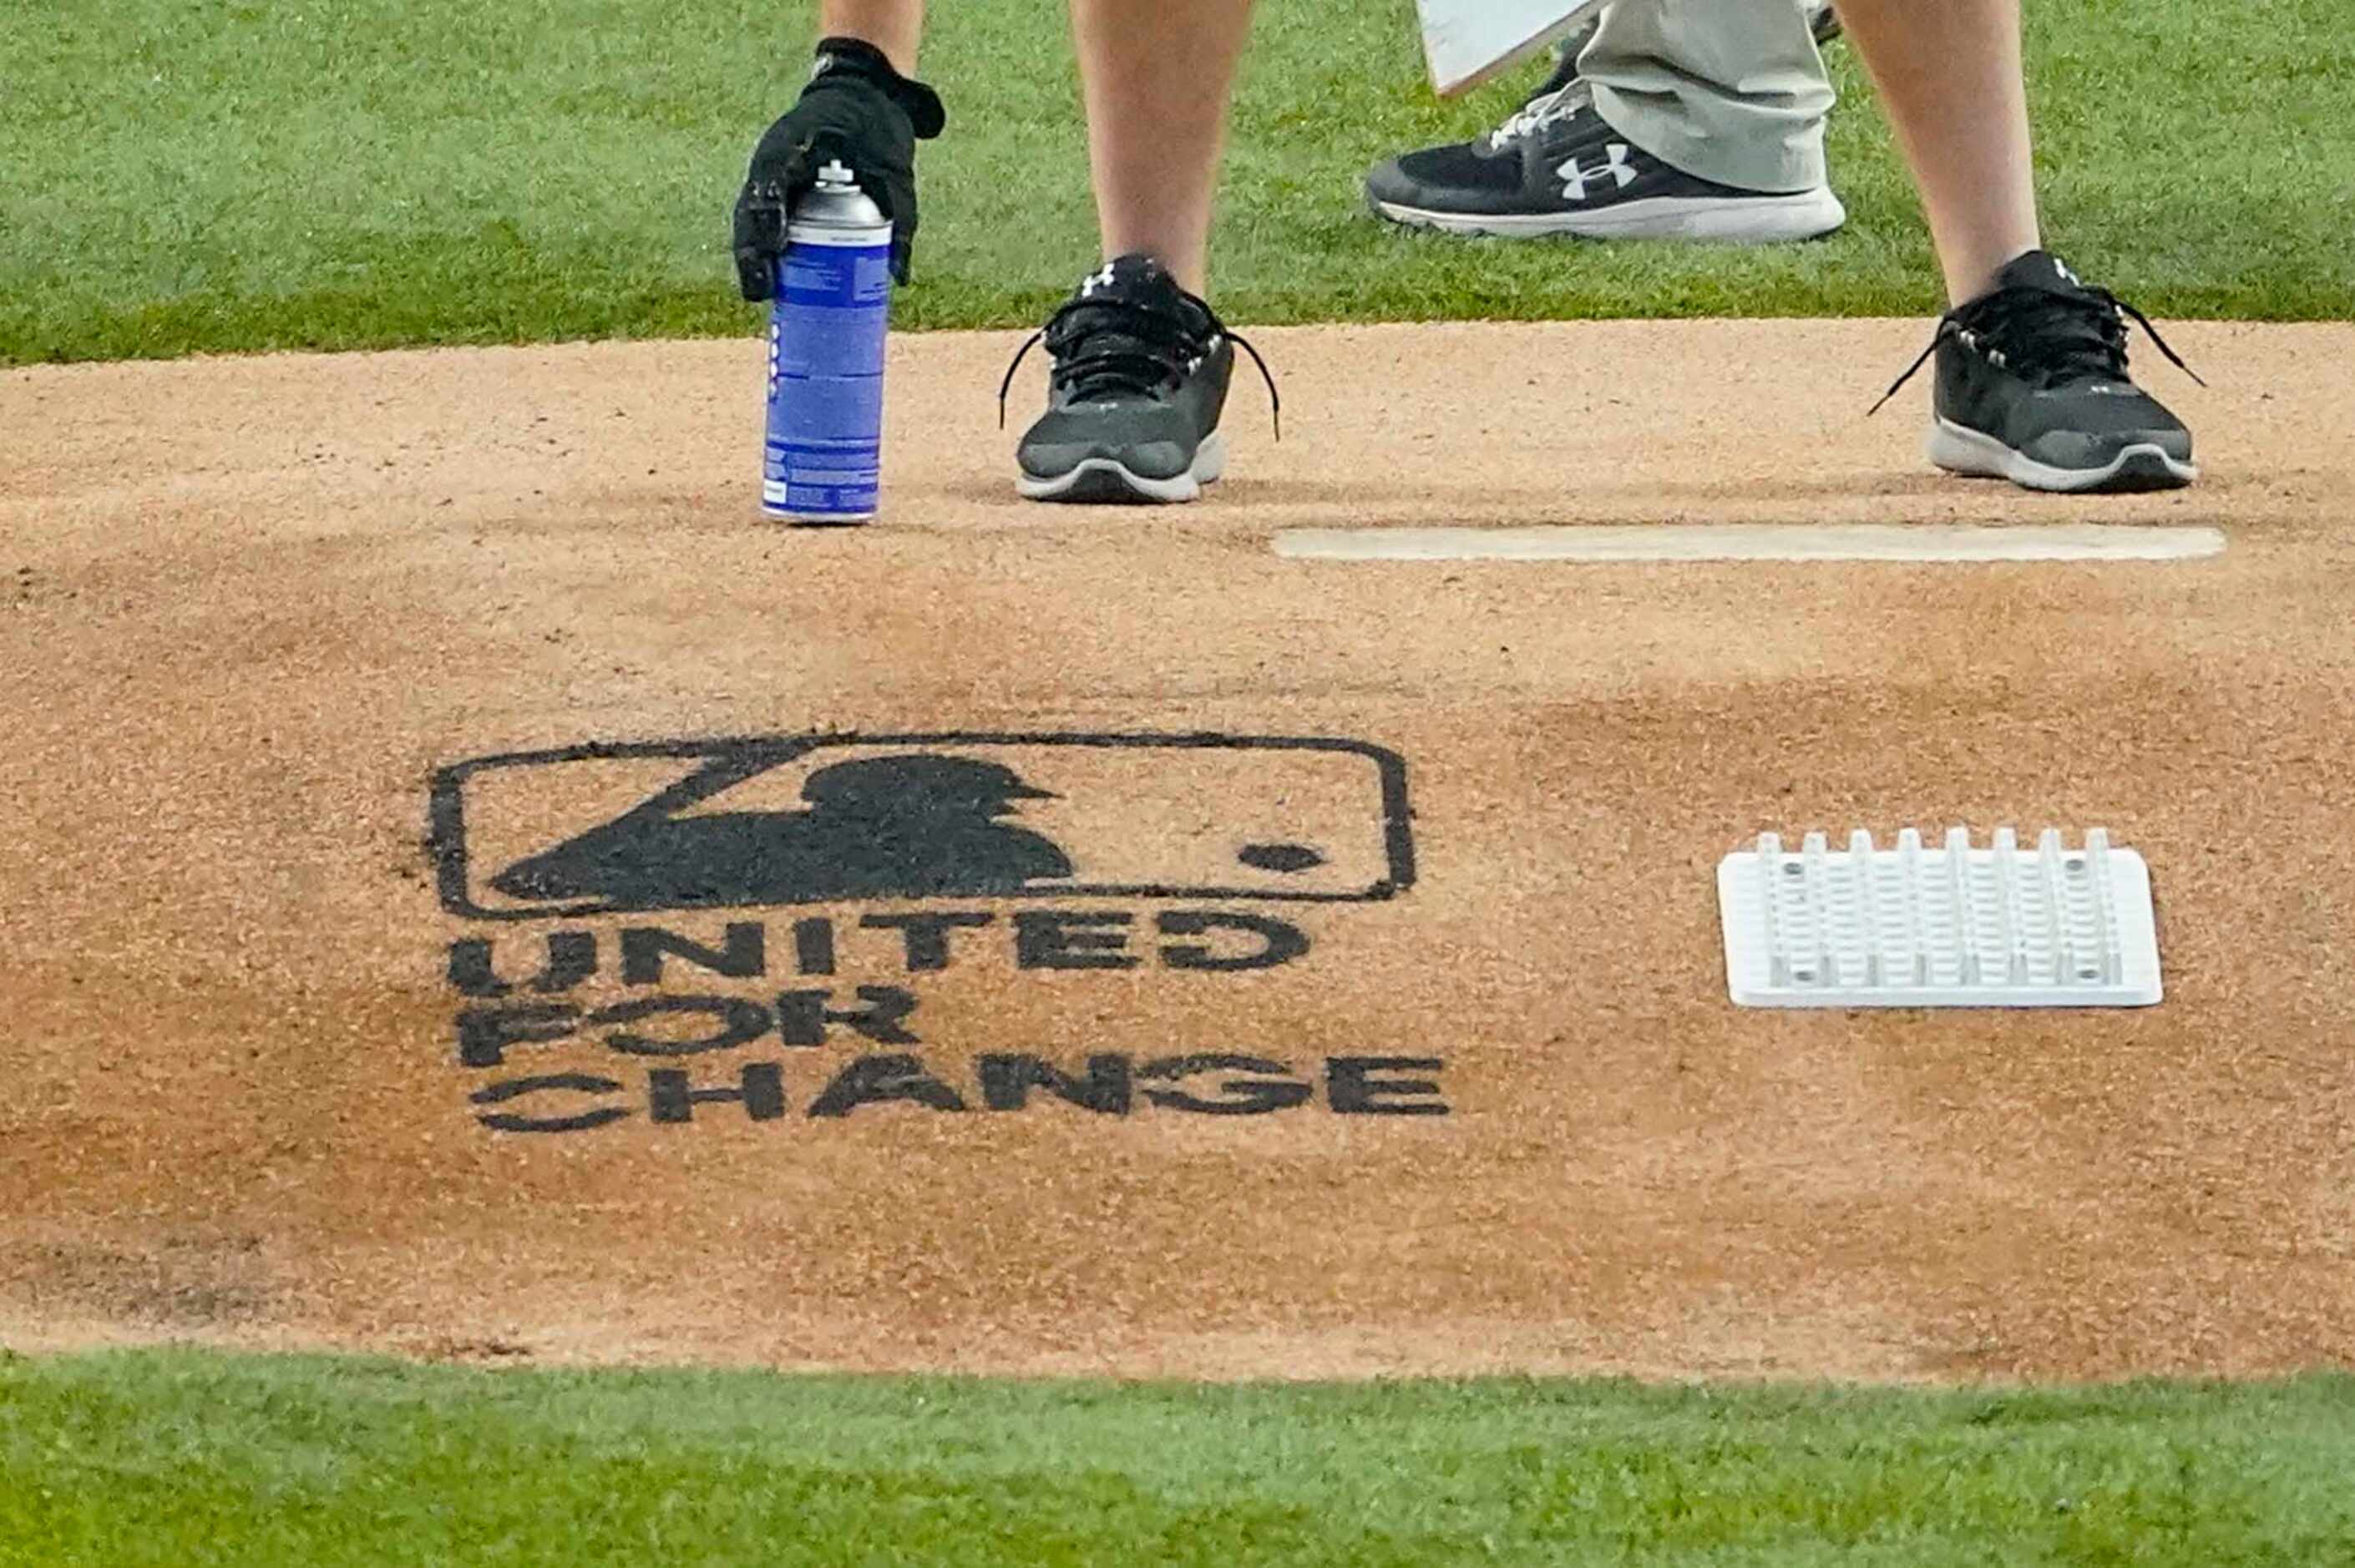 Grounds keepers spray paint ÒUnited For ChangeÓ on the pitchers mound before a baseball game...